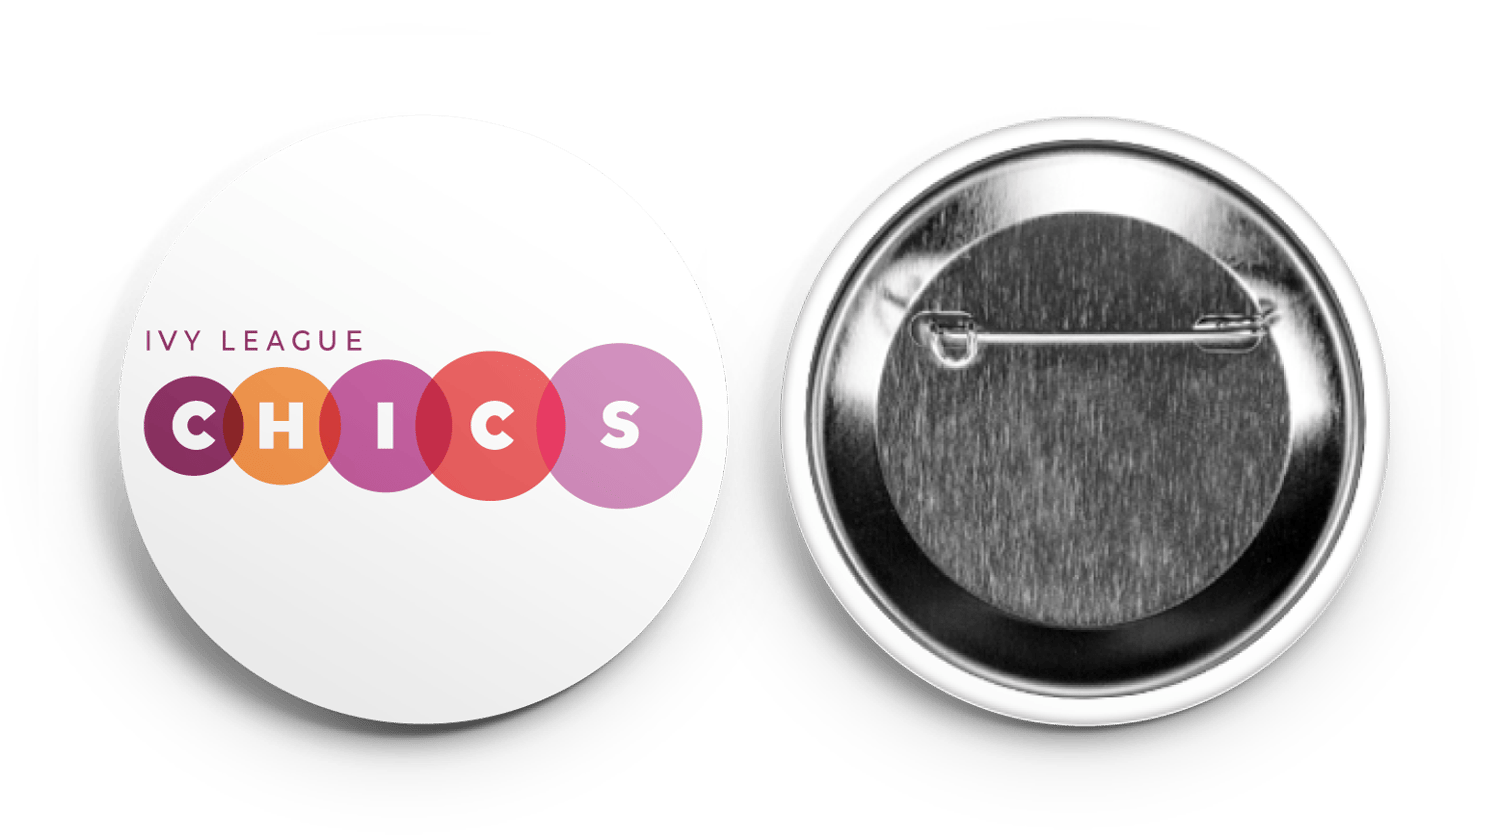 Image of ivy league CHICS logo Button